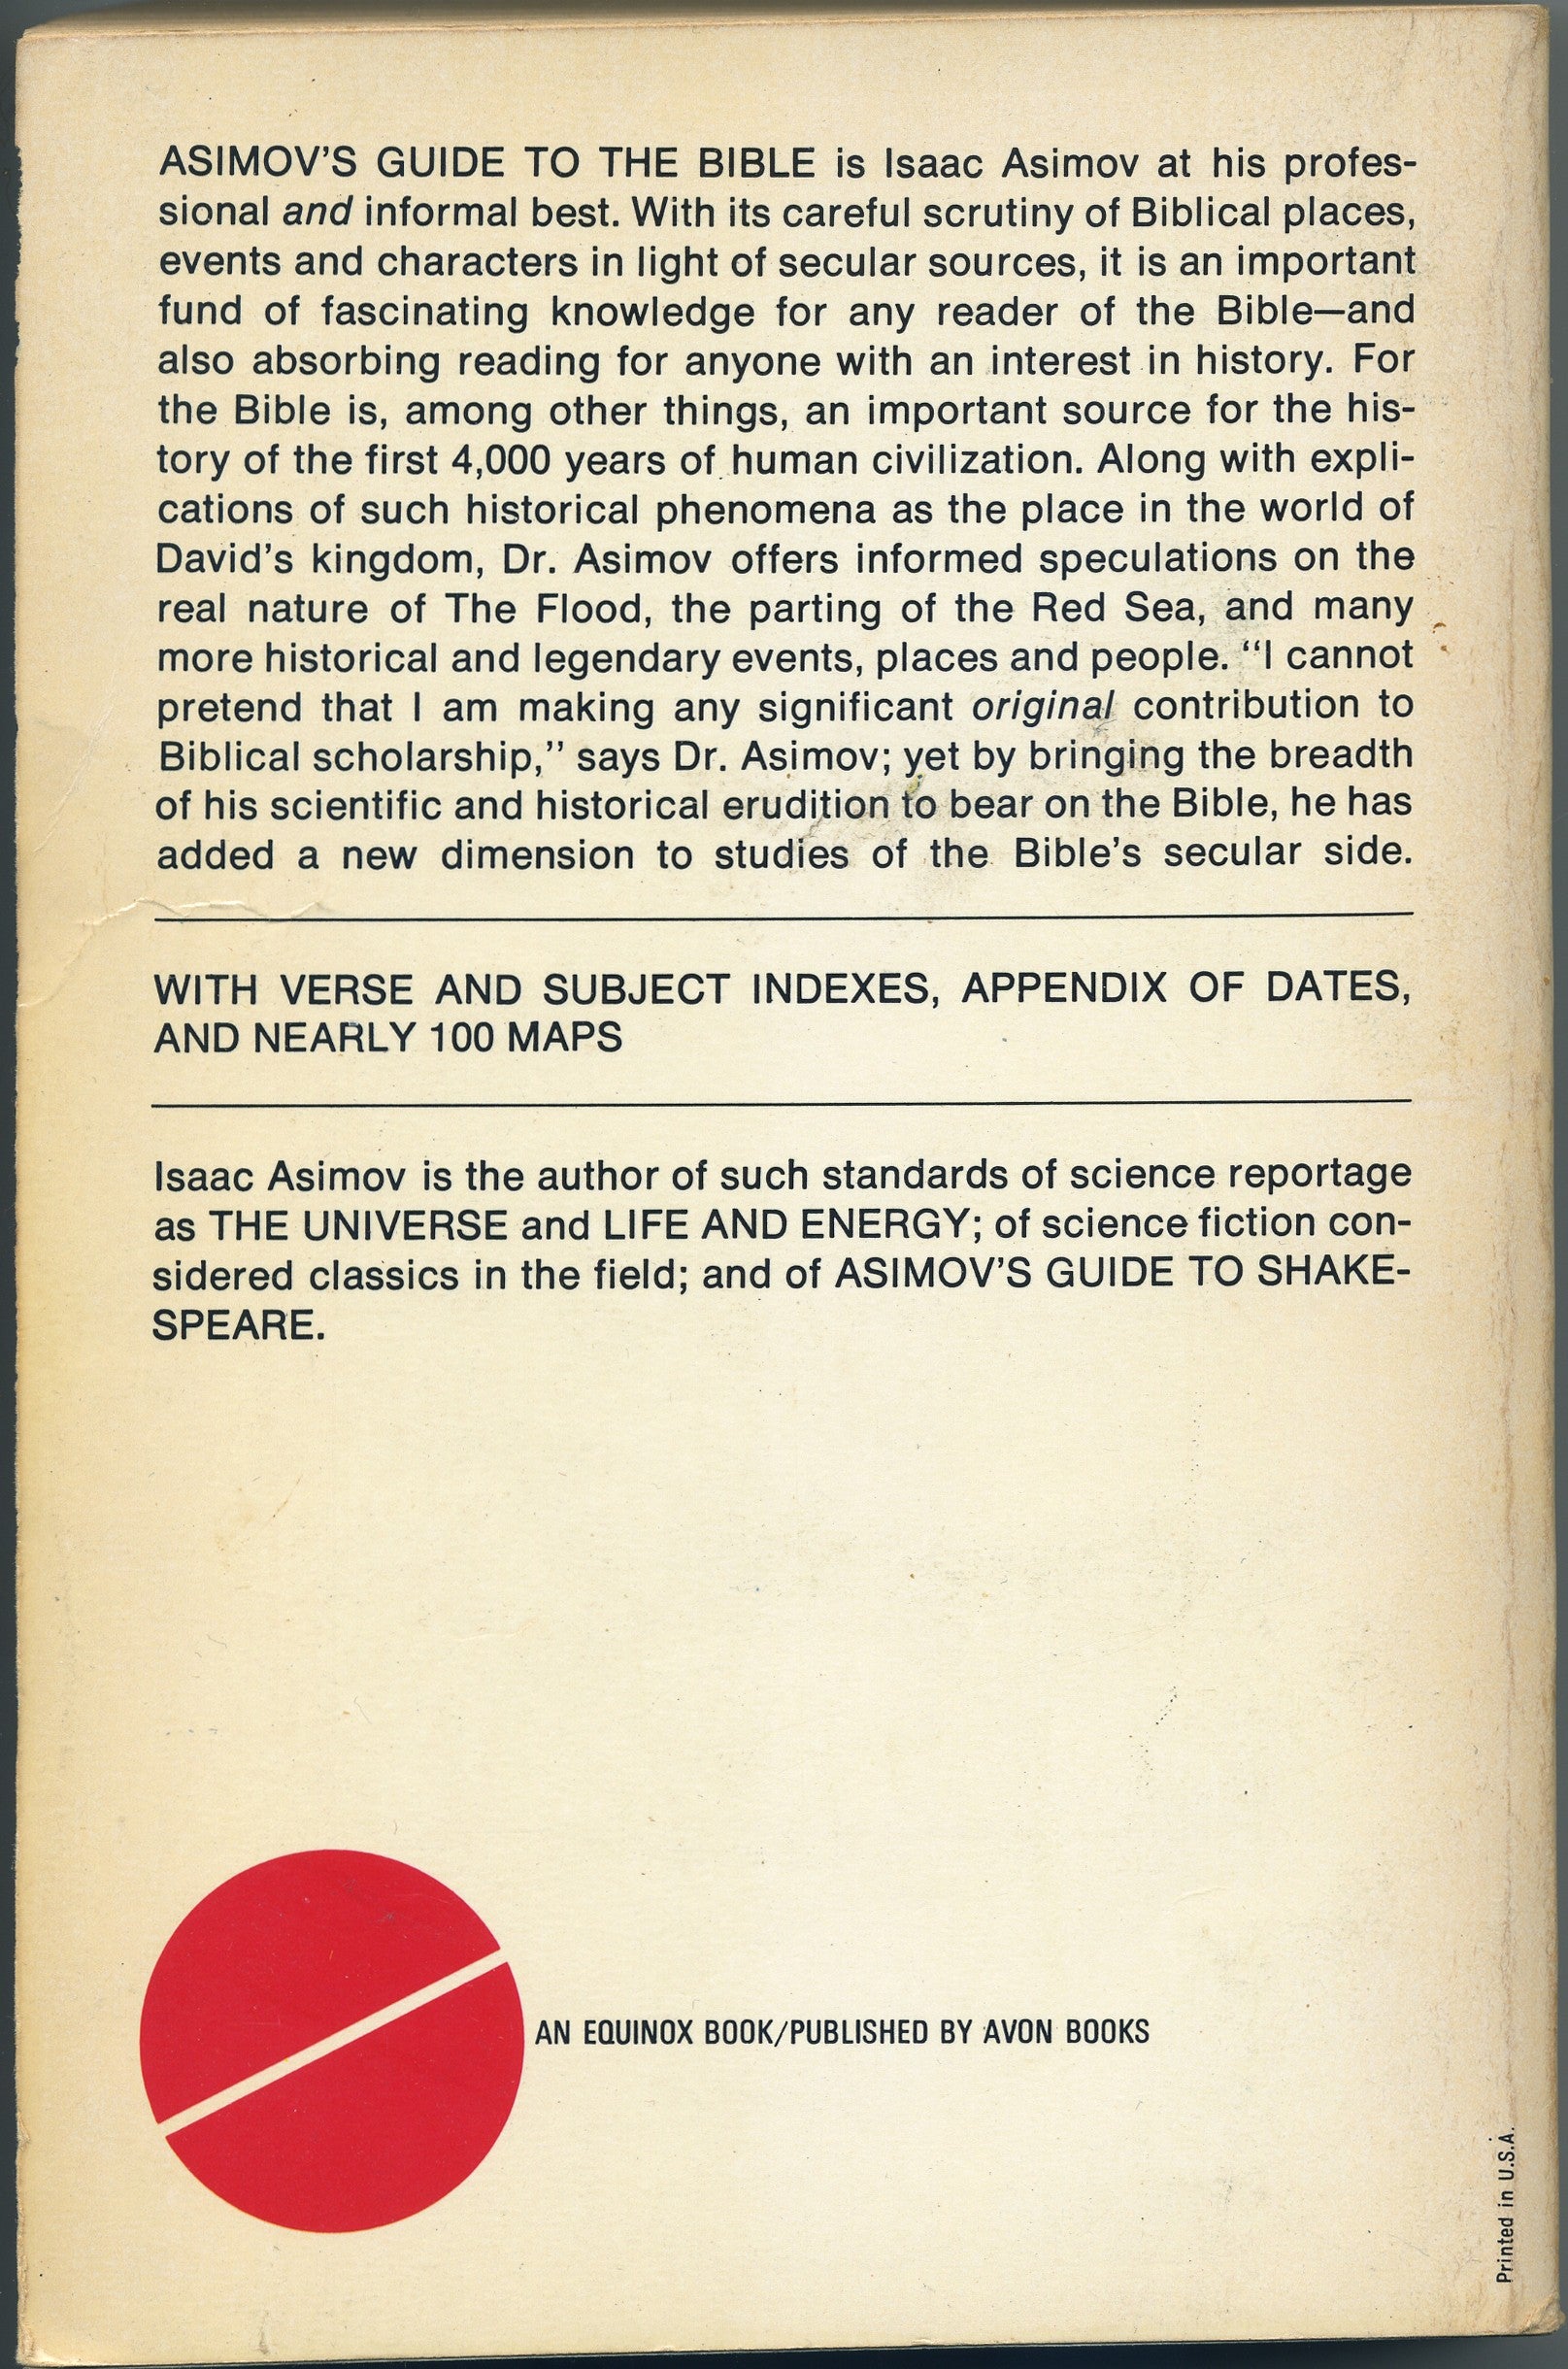 Asimov's Guide to the Bible: The Old Testament back cover